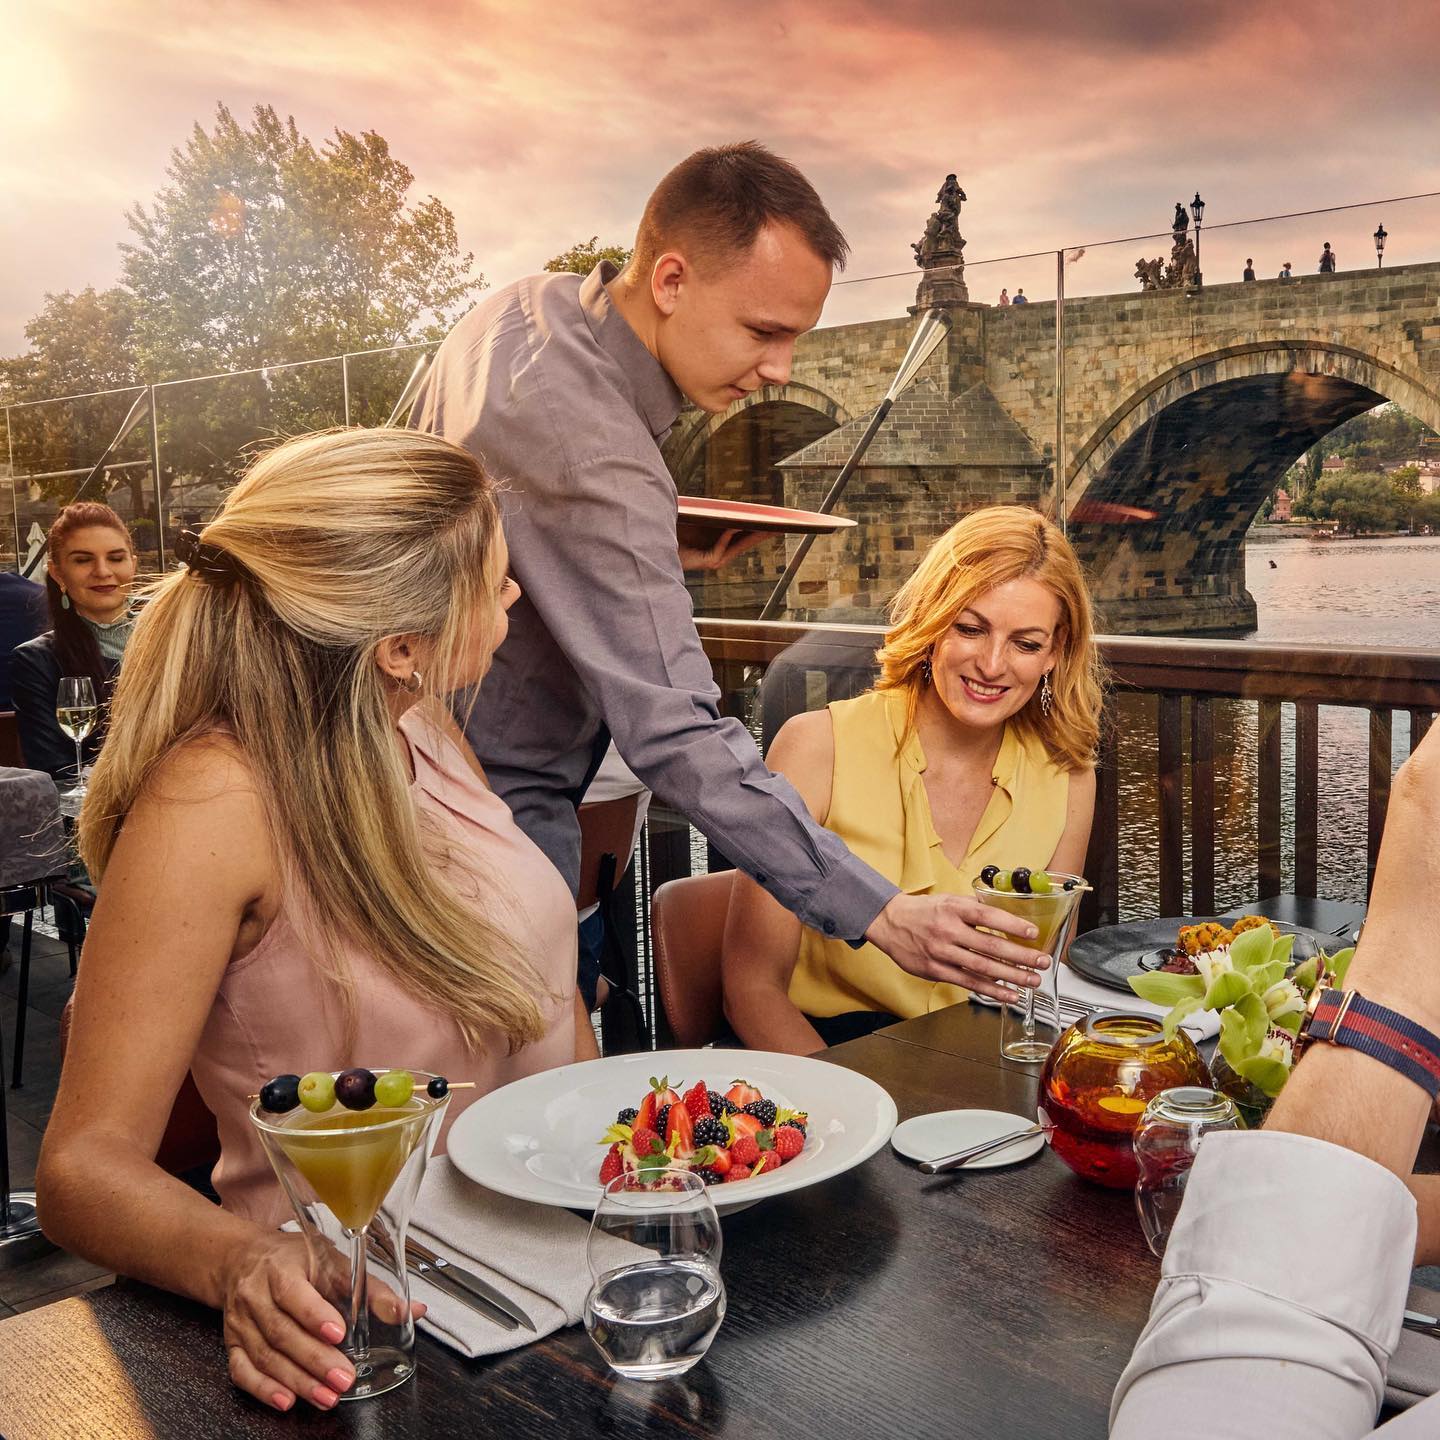 Enjoying cold drinks and good food on the patio of Mlýnec Restaurant during hot summer days while taking in romantic views of the Charles Bridge